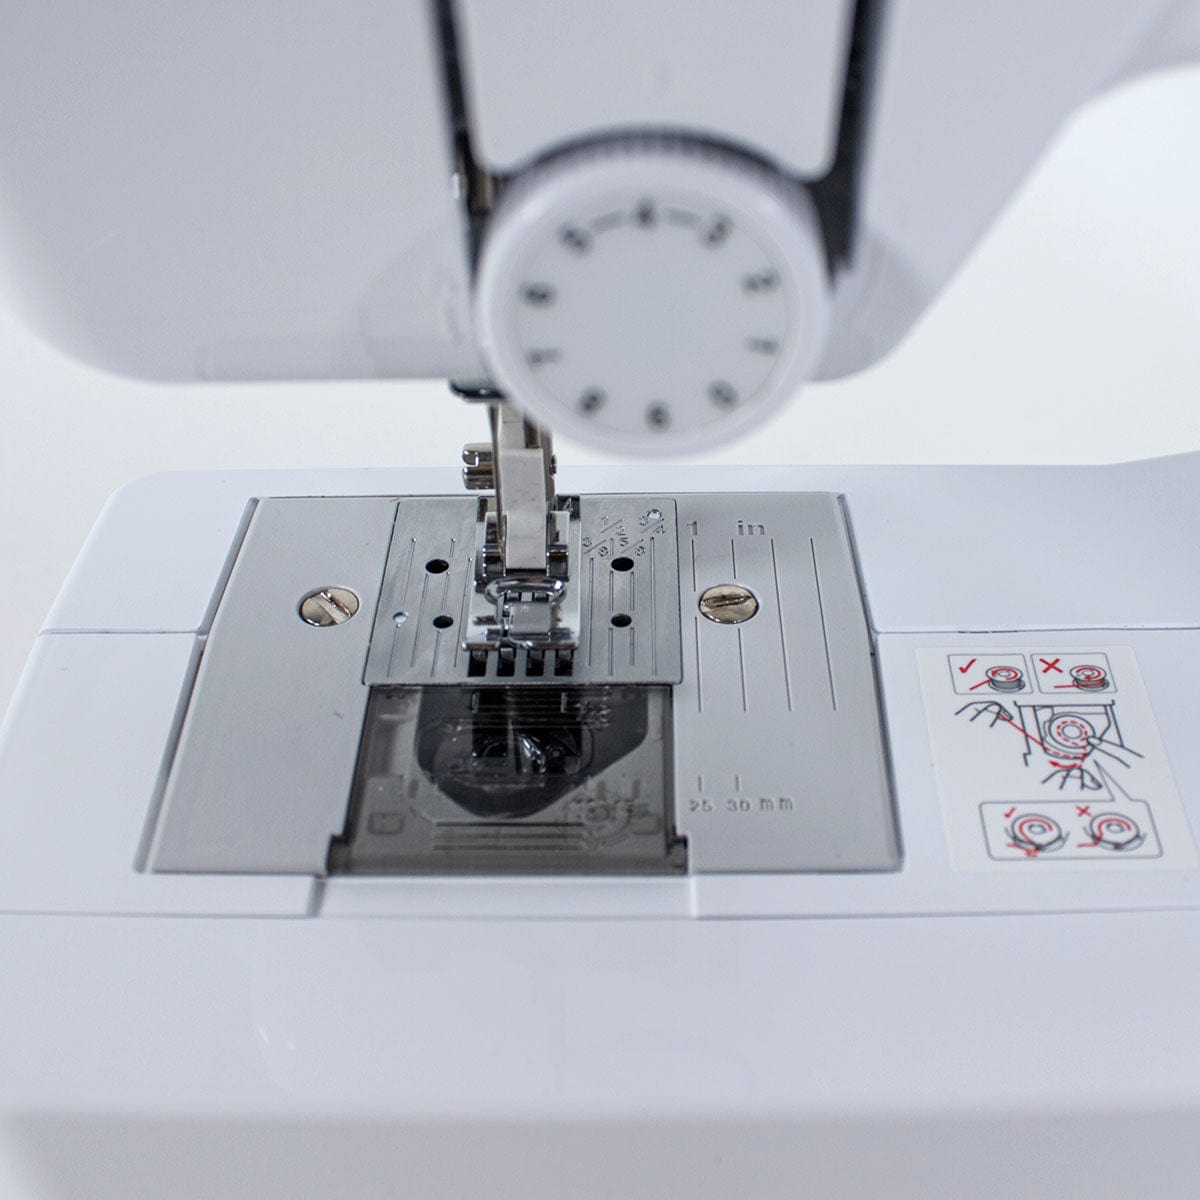 Brother L14S Sewing Machine